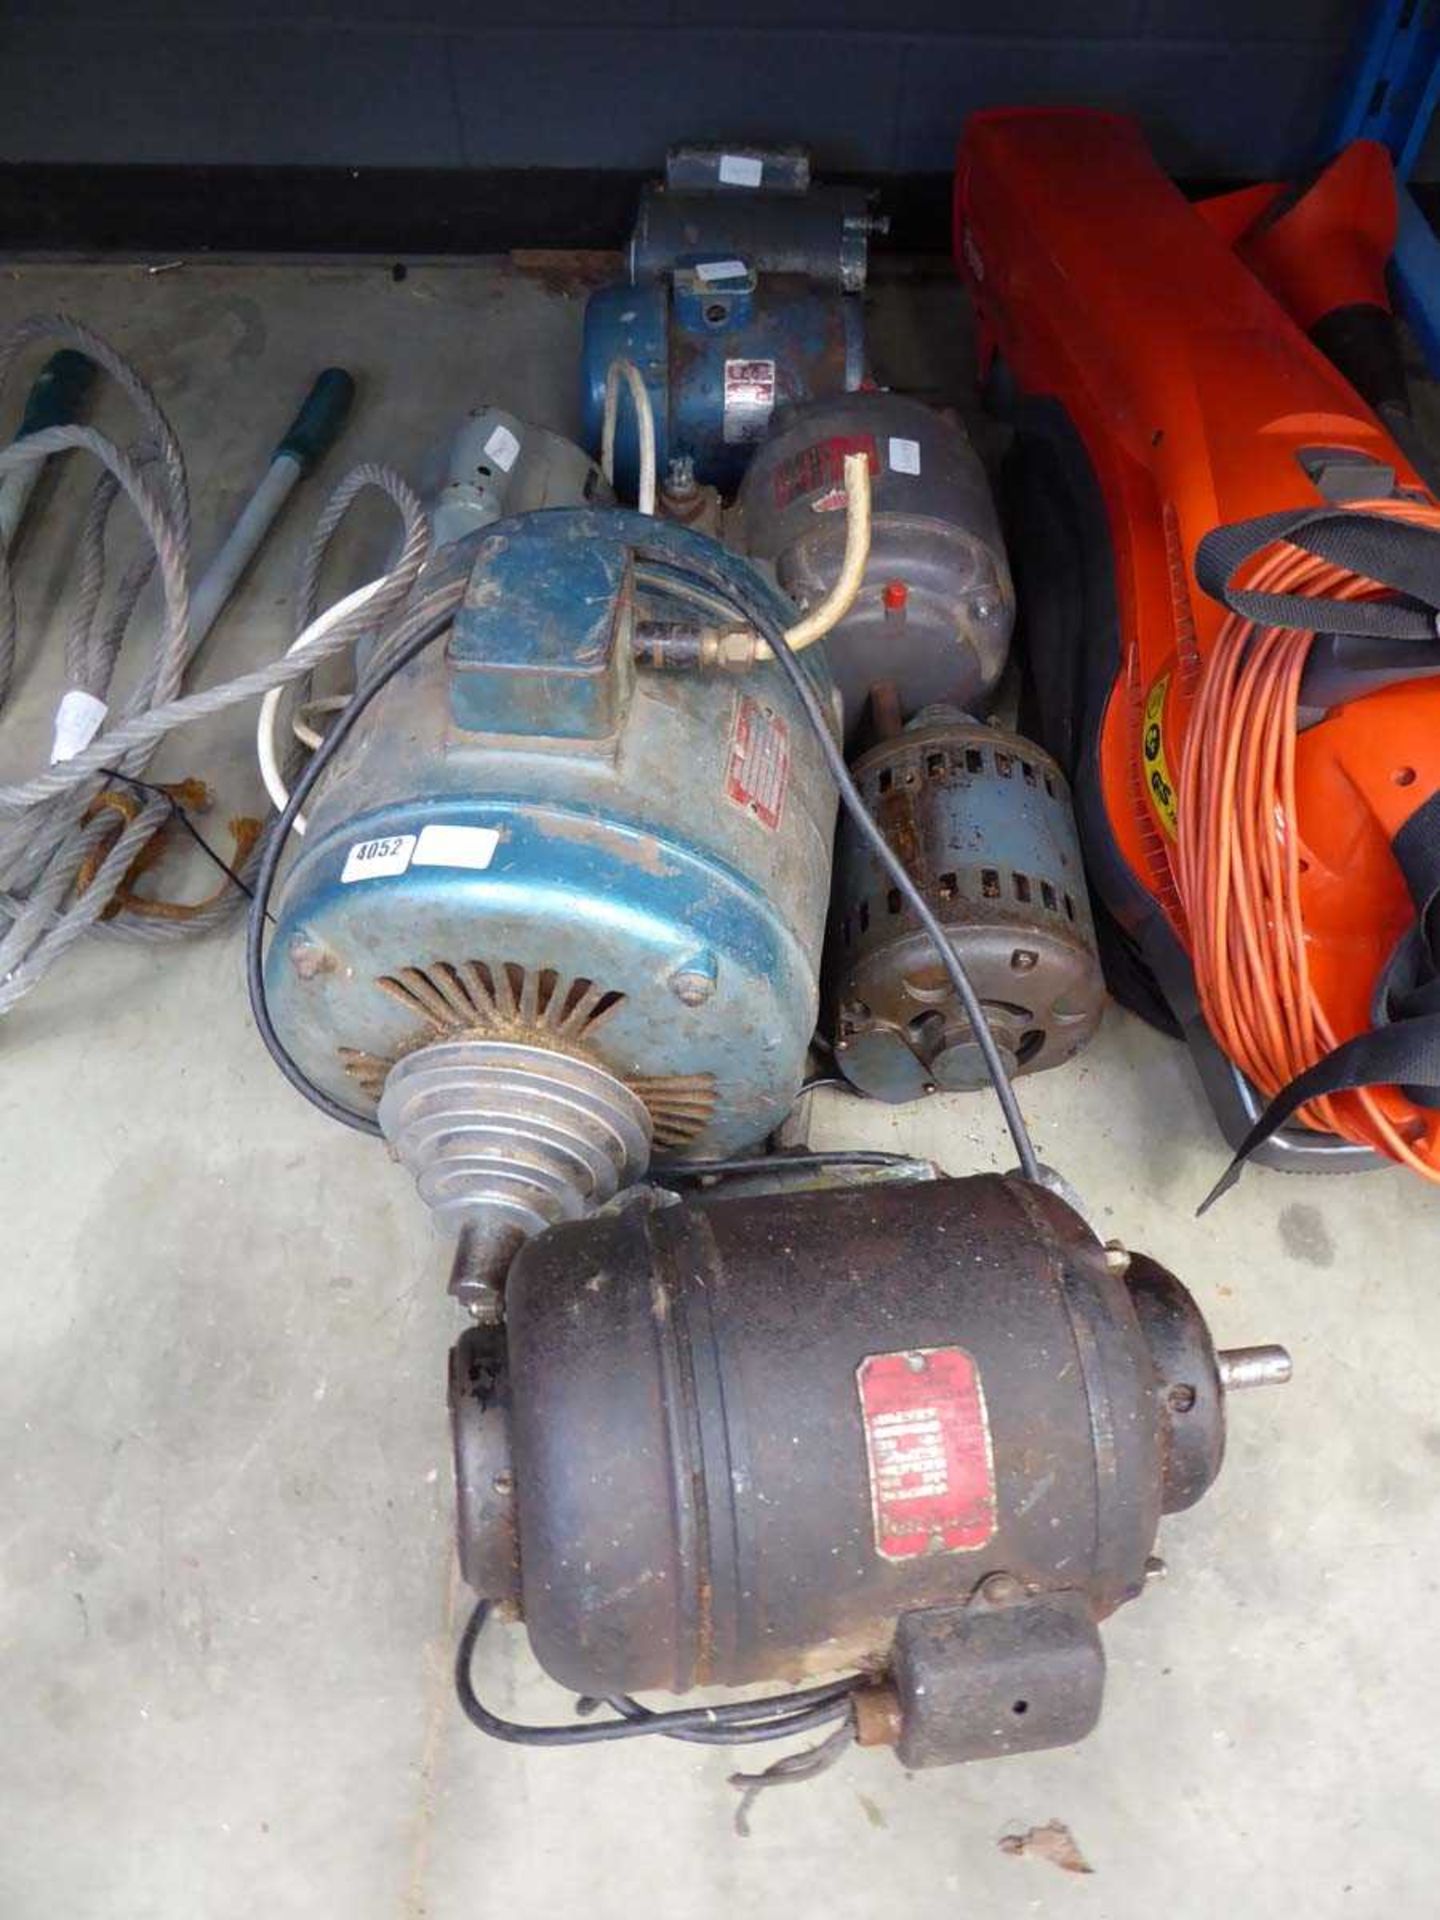 4 x small electric motors and a large electric motor